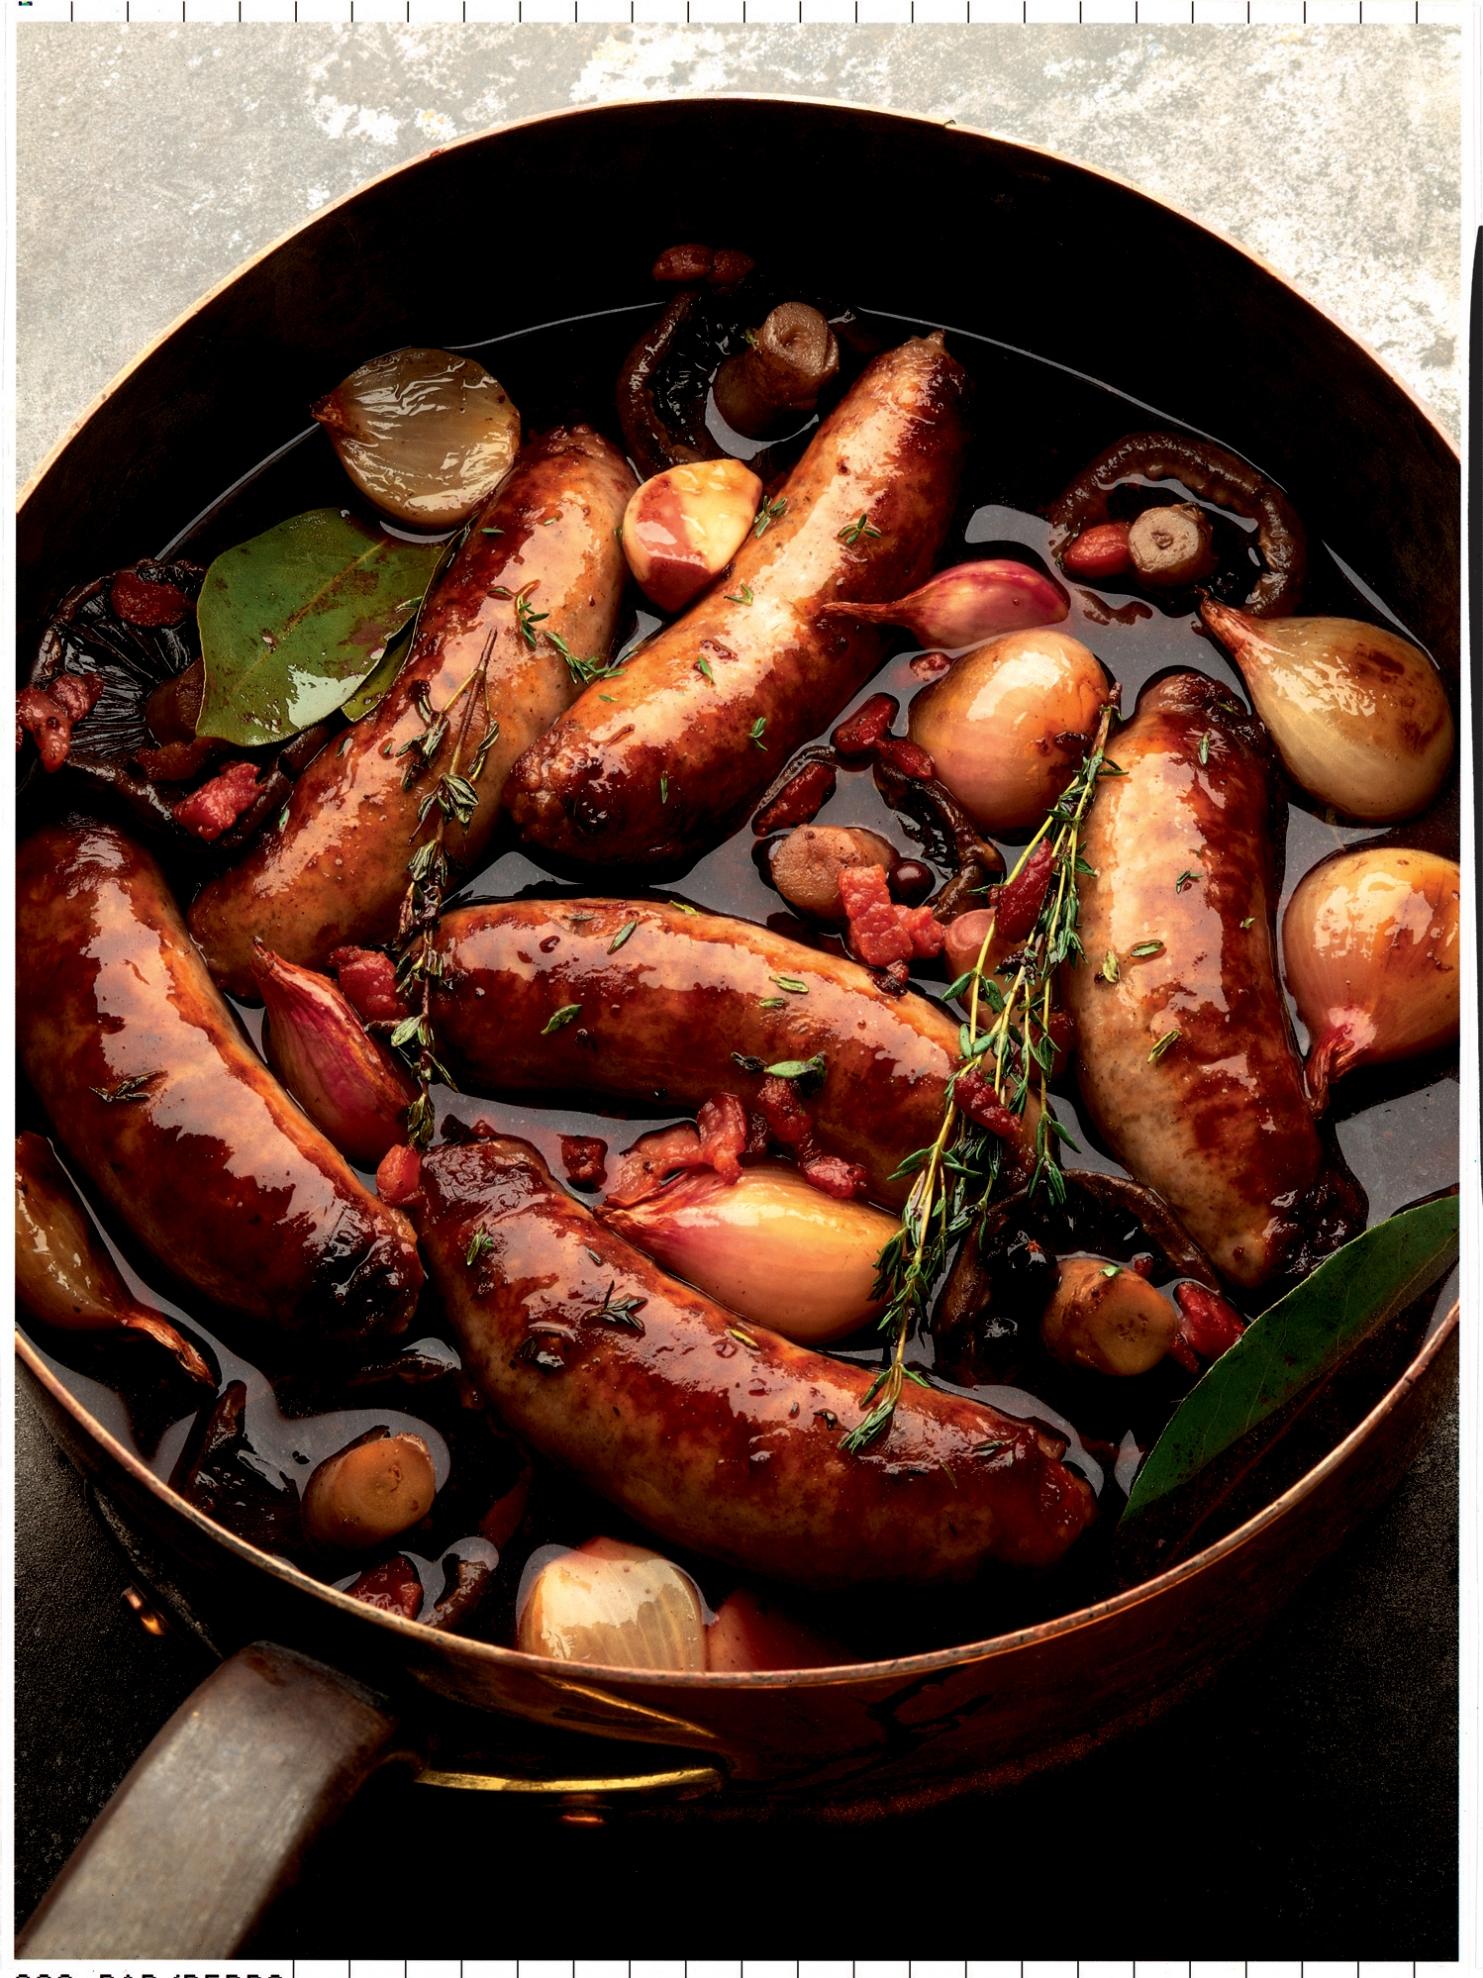  Savor the rich aroma of red wine as it blends with juicy sausages.